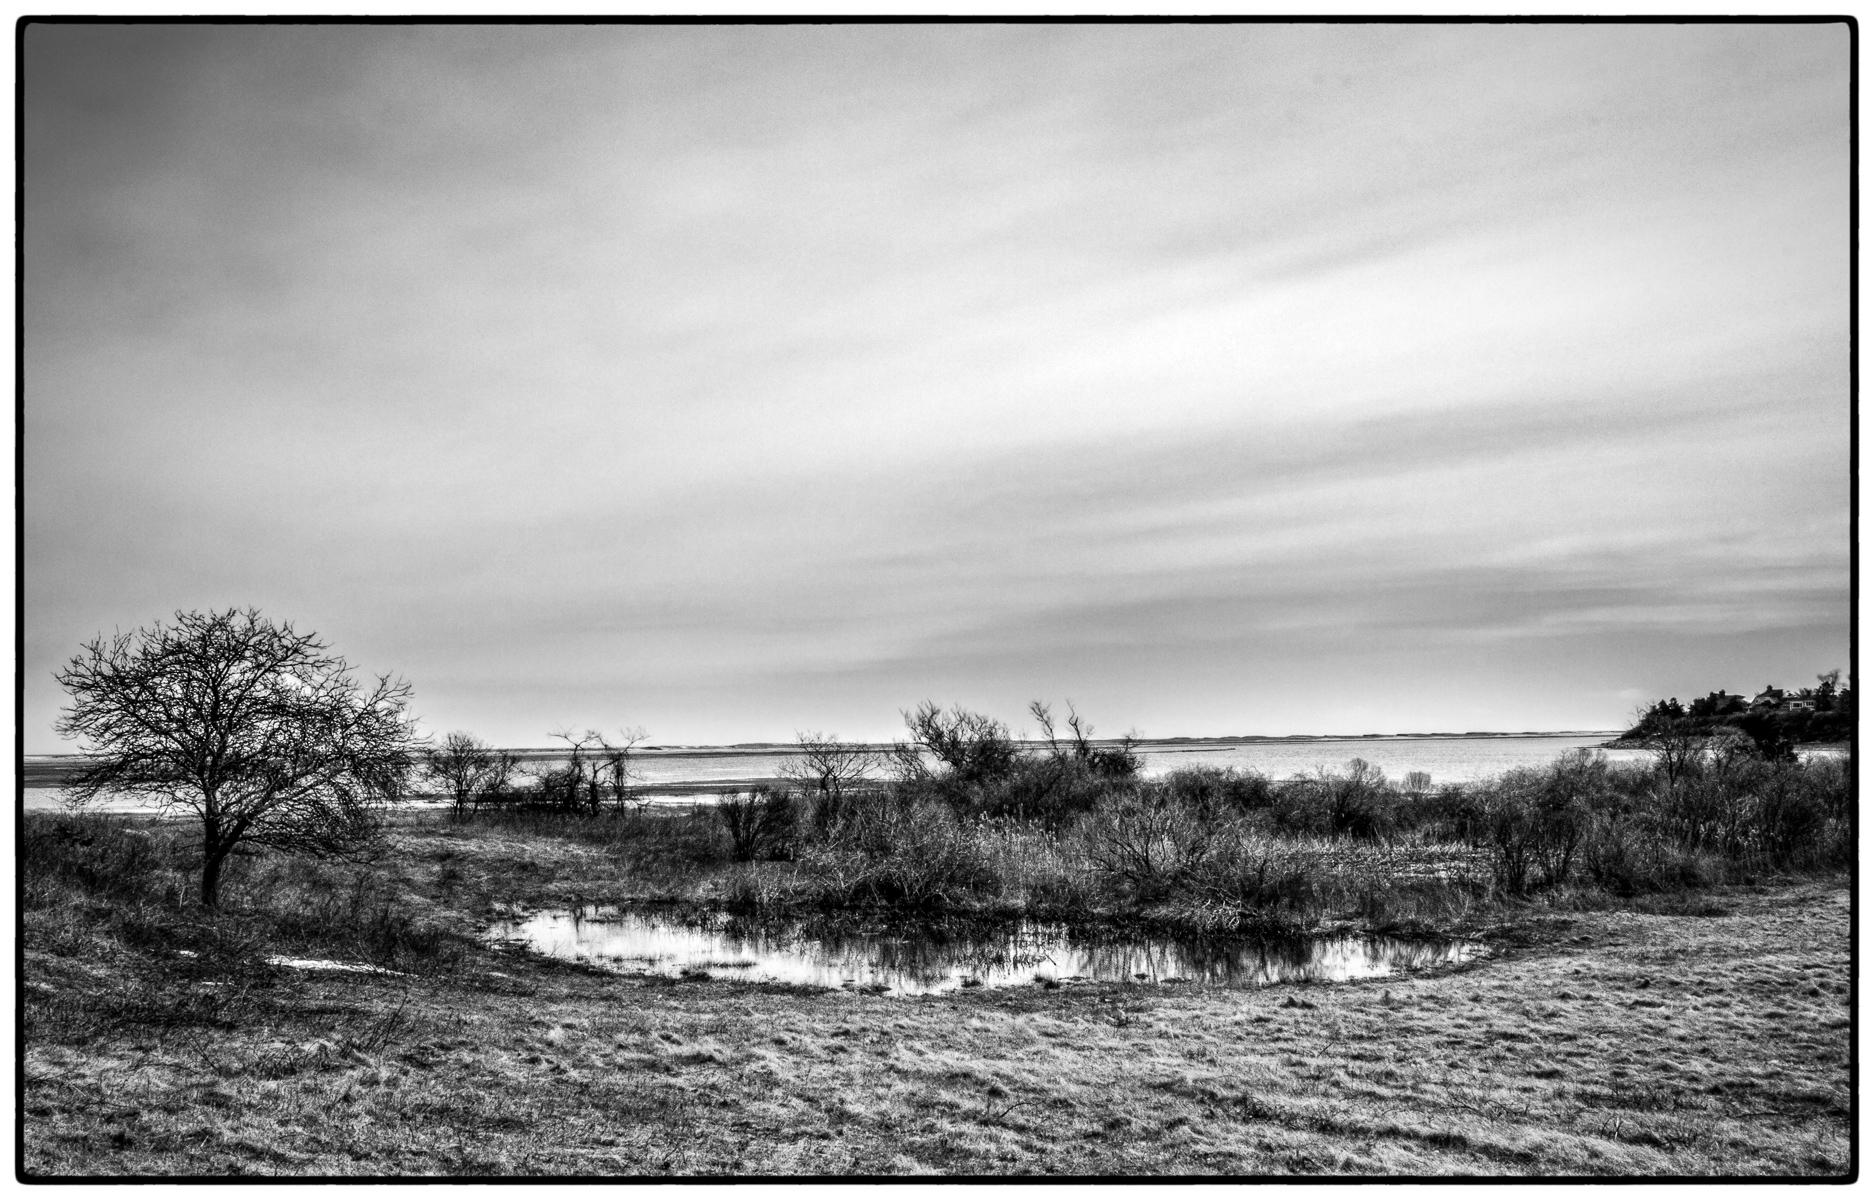  Ocean View from Fort Hill - BW